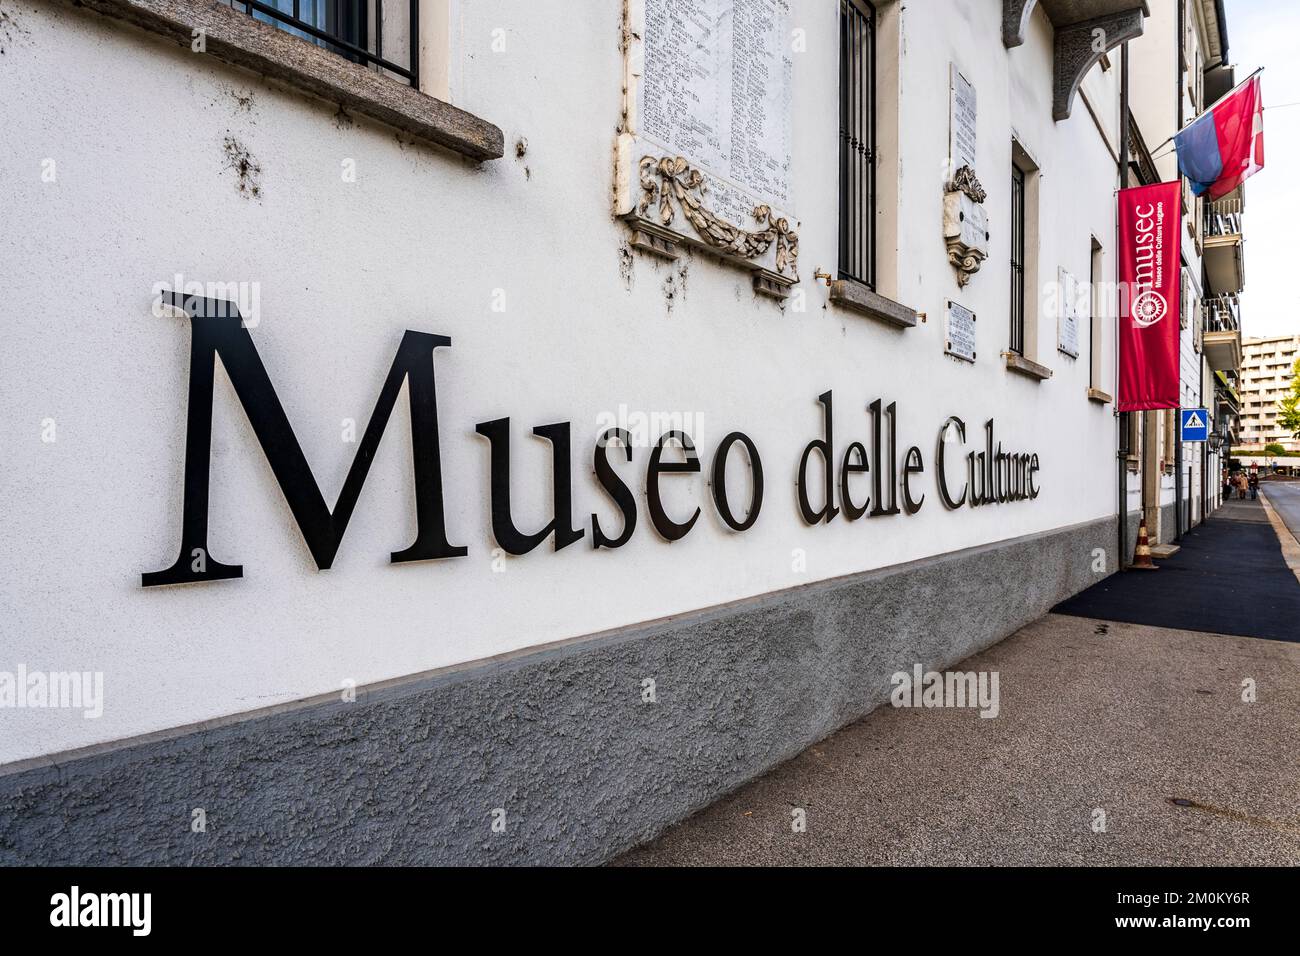 Exterior view of Museuc Museum (Museum of Cultures), exhibition centre and gallery dedicated to Asian arts in Lugano, Canton Ticino, Switzerland. Stock Photo